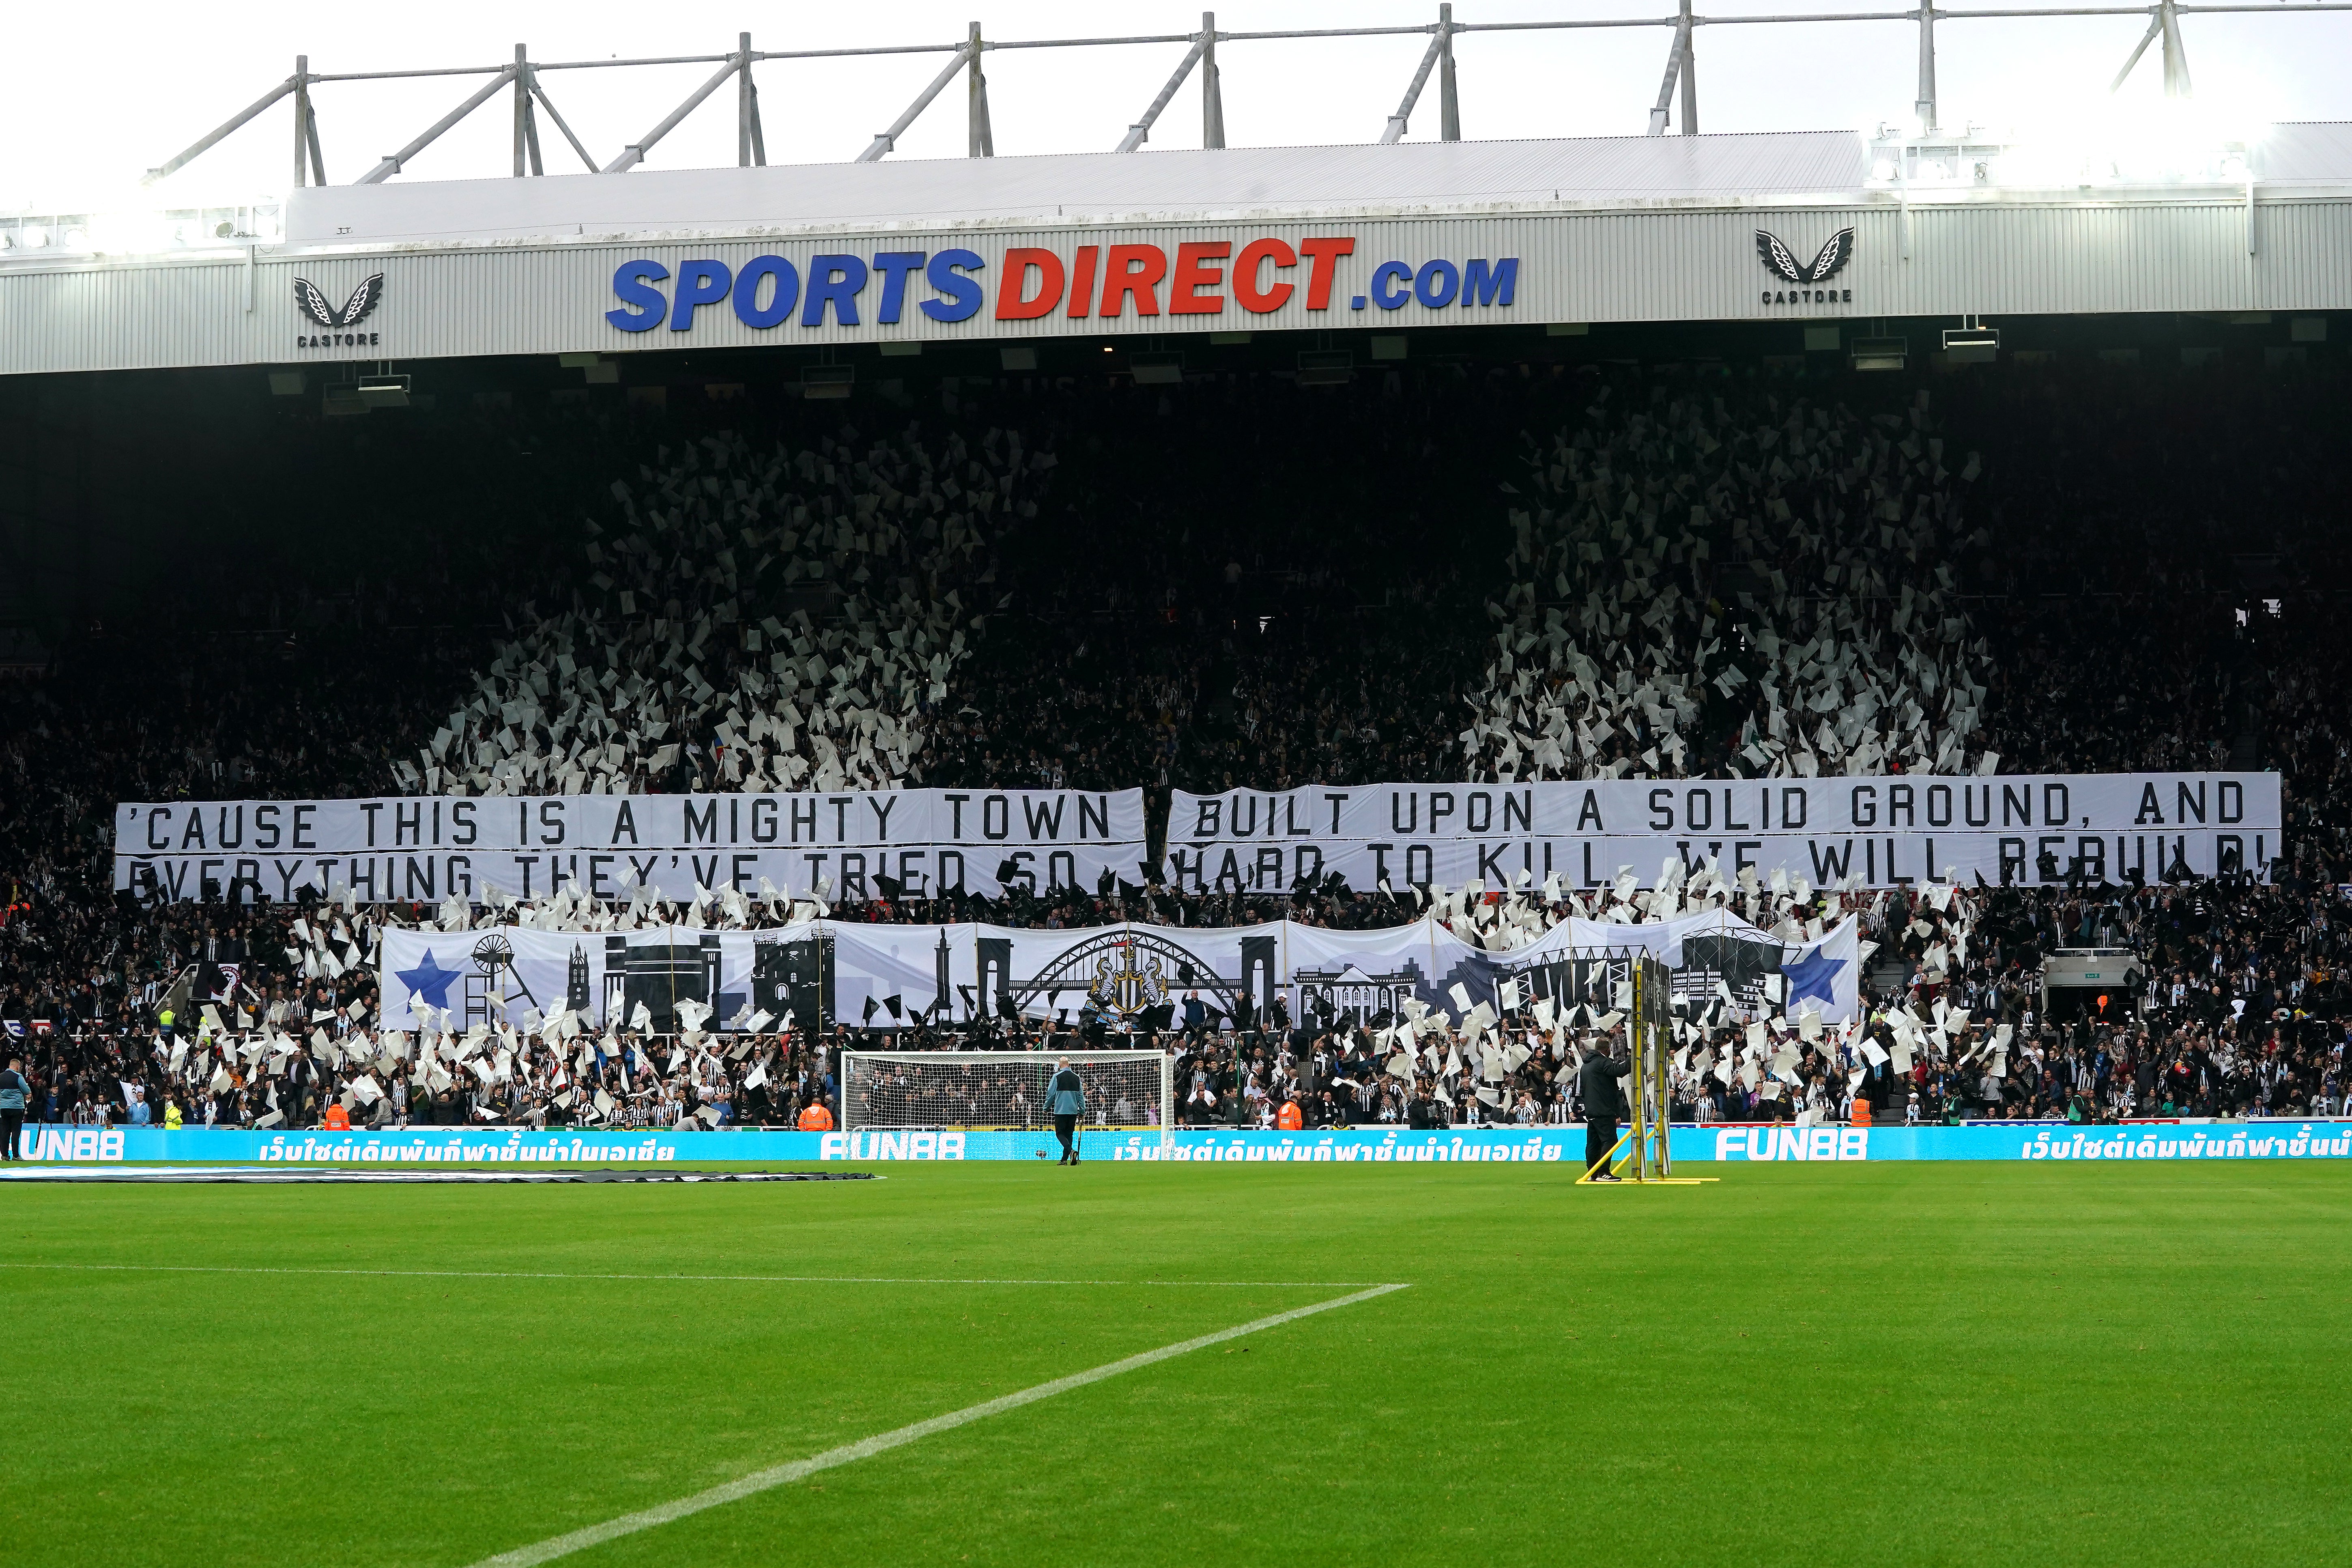 The Sports Direct branding at St James’ Park is being taken down, the club have confirmed (Owen Humphreys/PA)